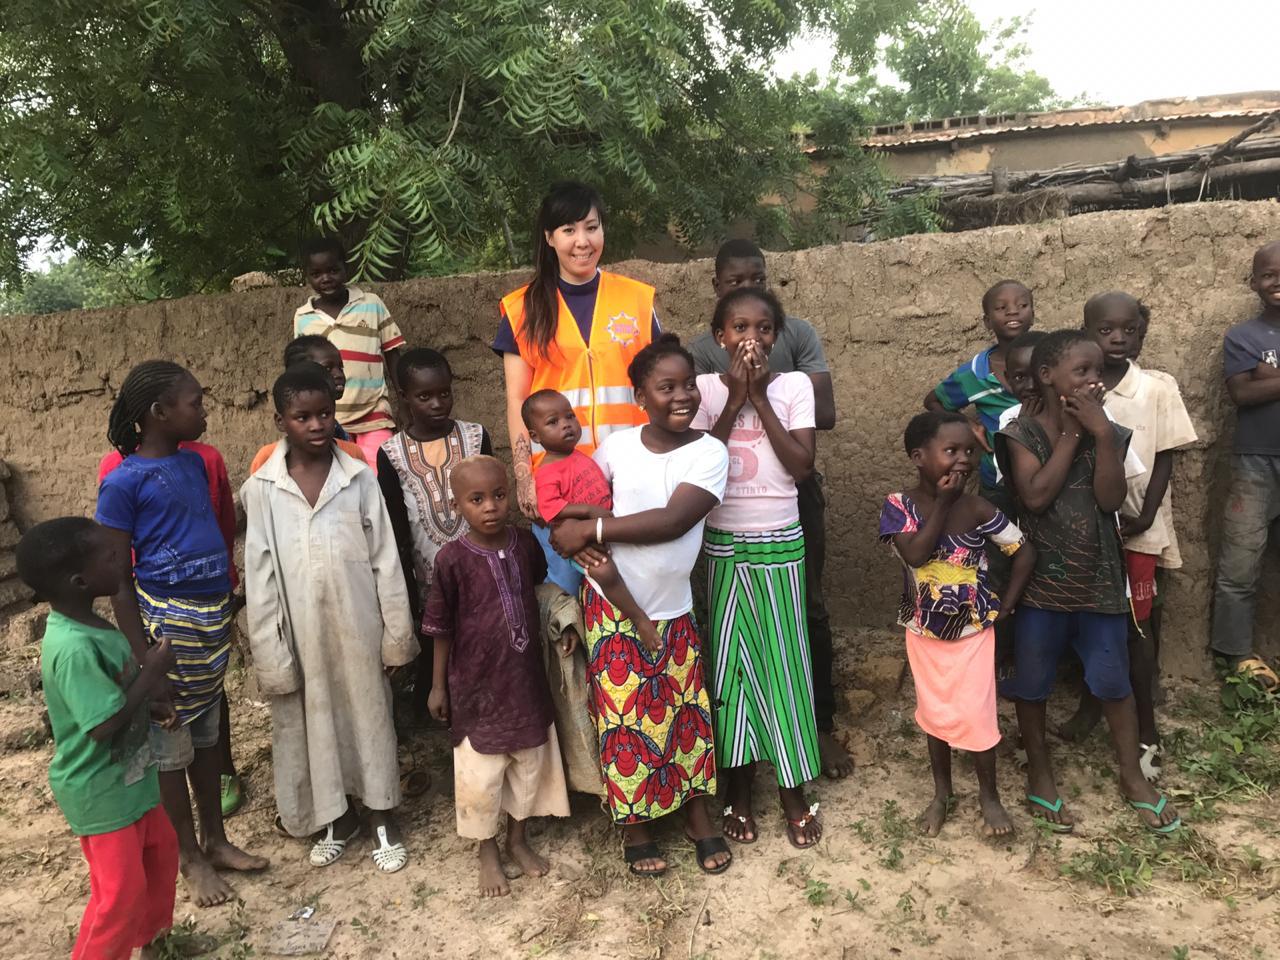 TAKE A LOOK INSIDE THE JOURNEY OF OUR VOLUNTEER DOCTOR IN AFRICA